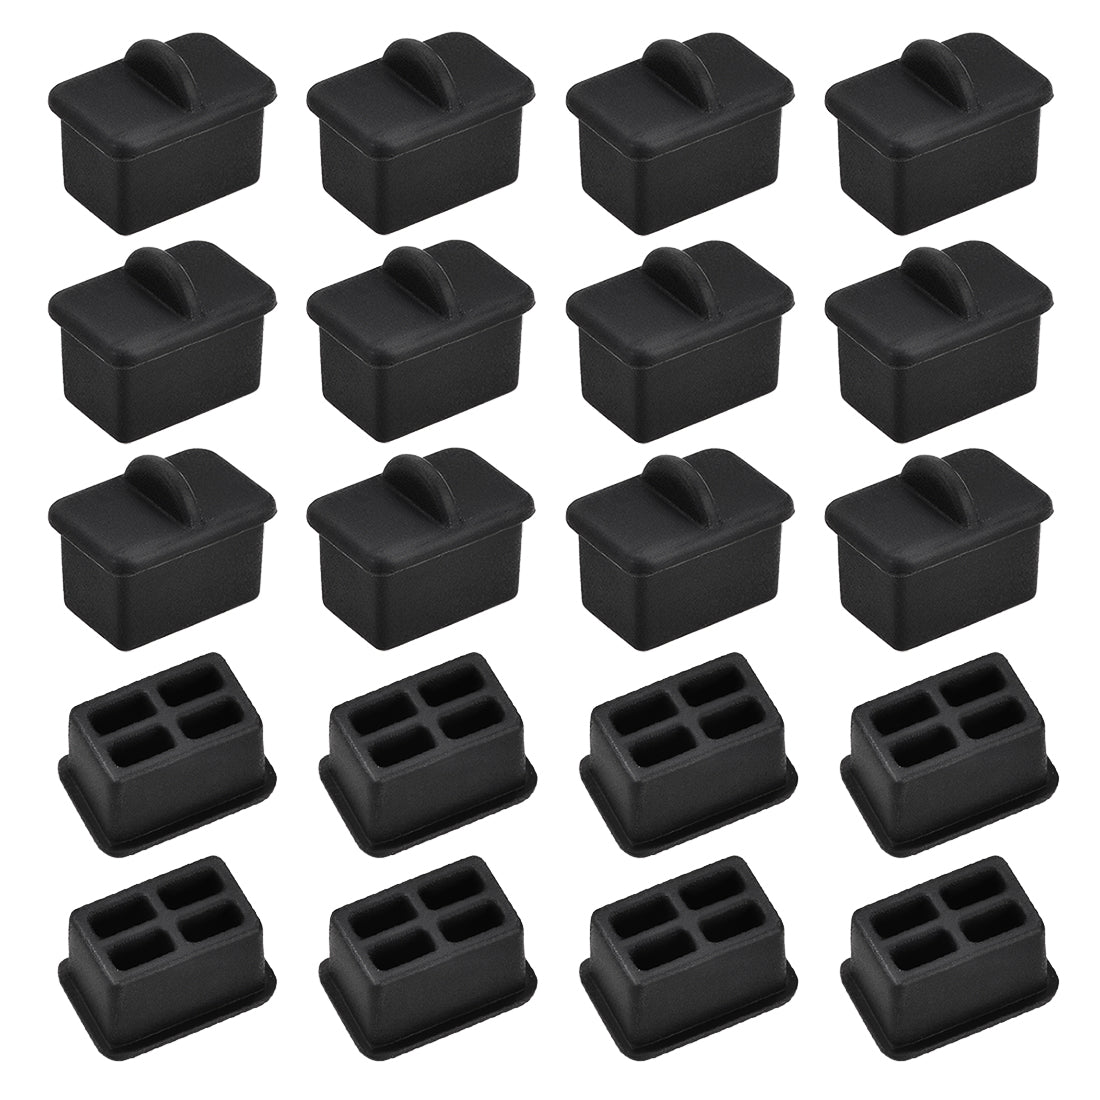 uxcell Uxcell SFP-A Port Anti-Dust Stopper Cap Cover Black Silicone 20pcs